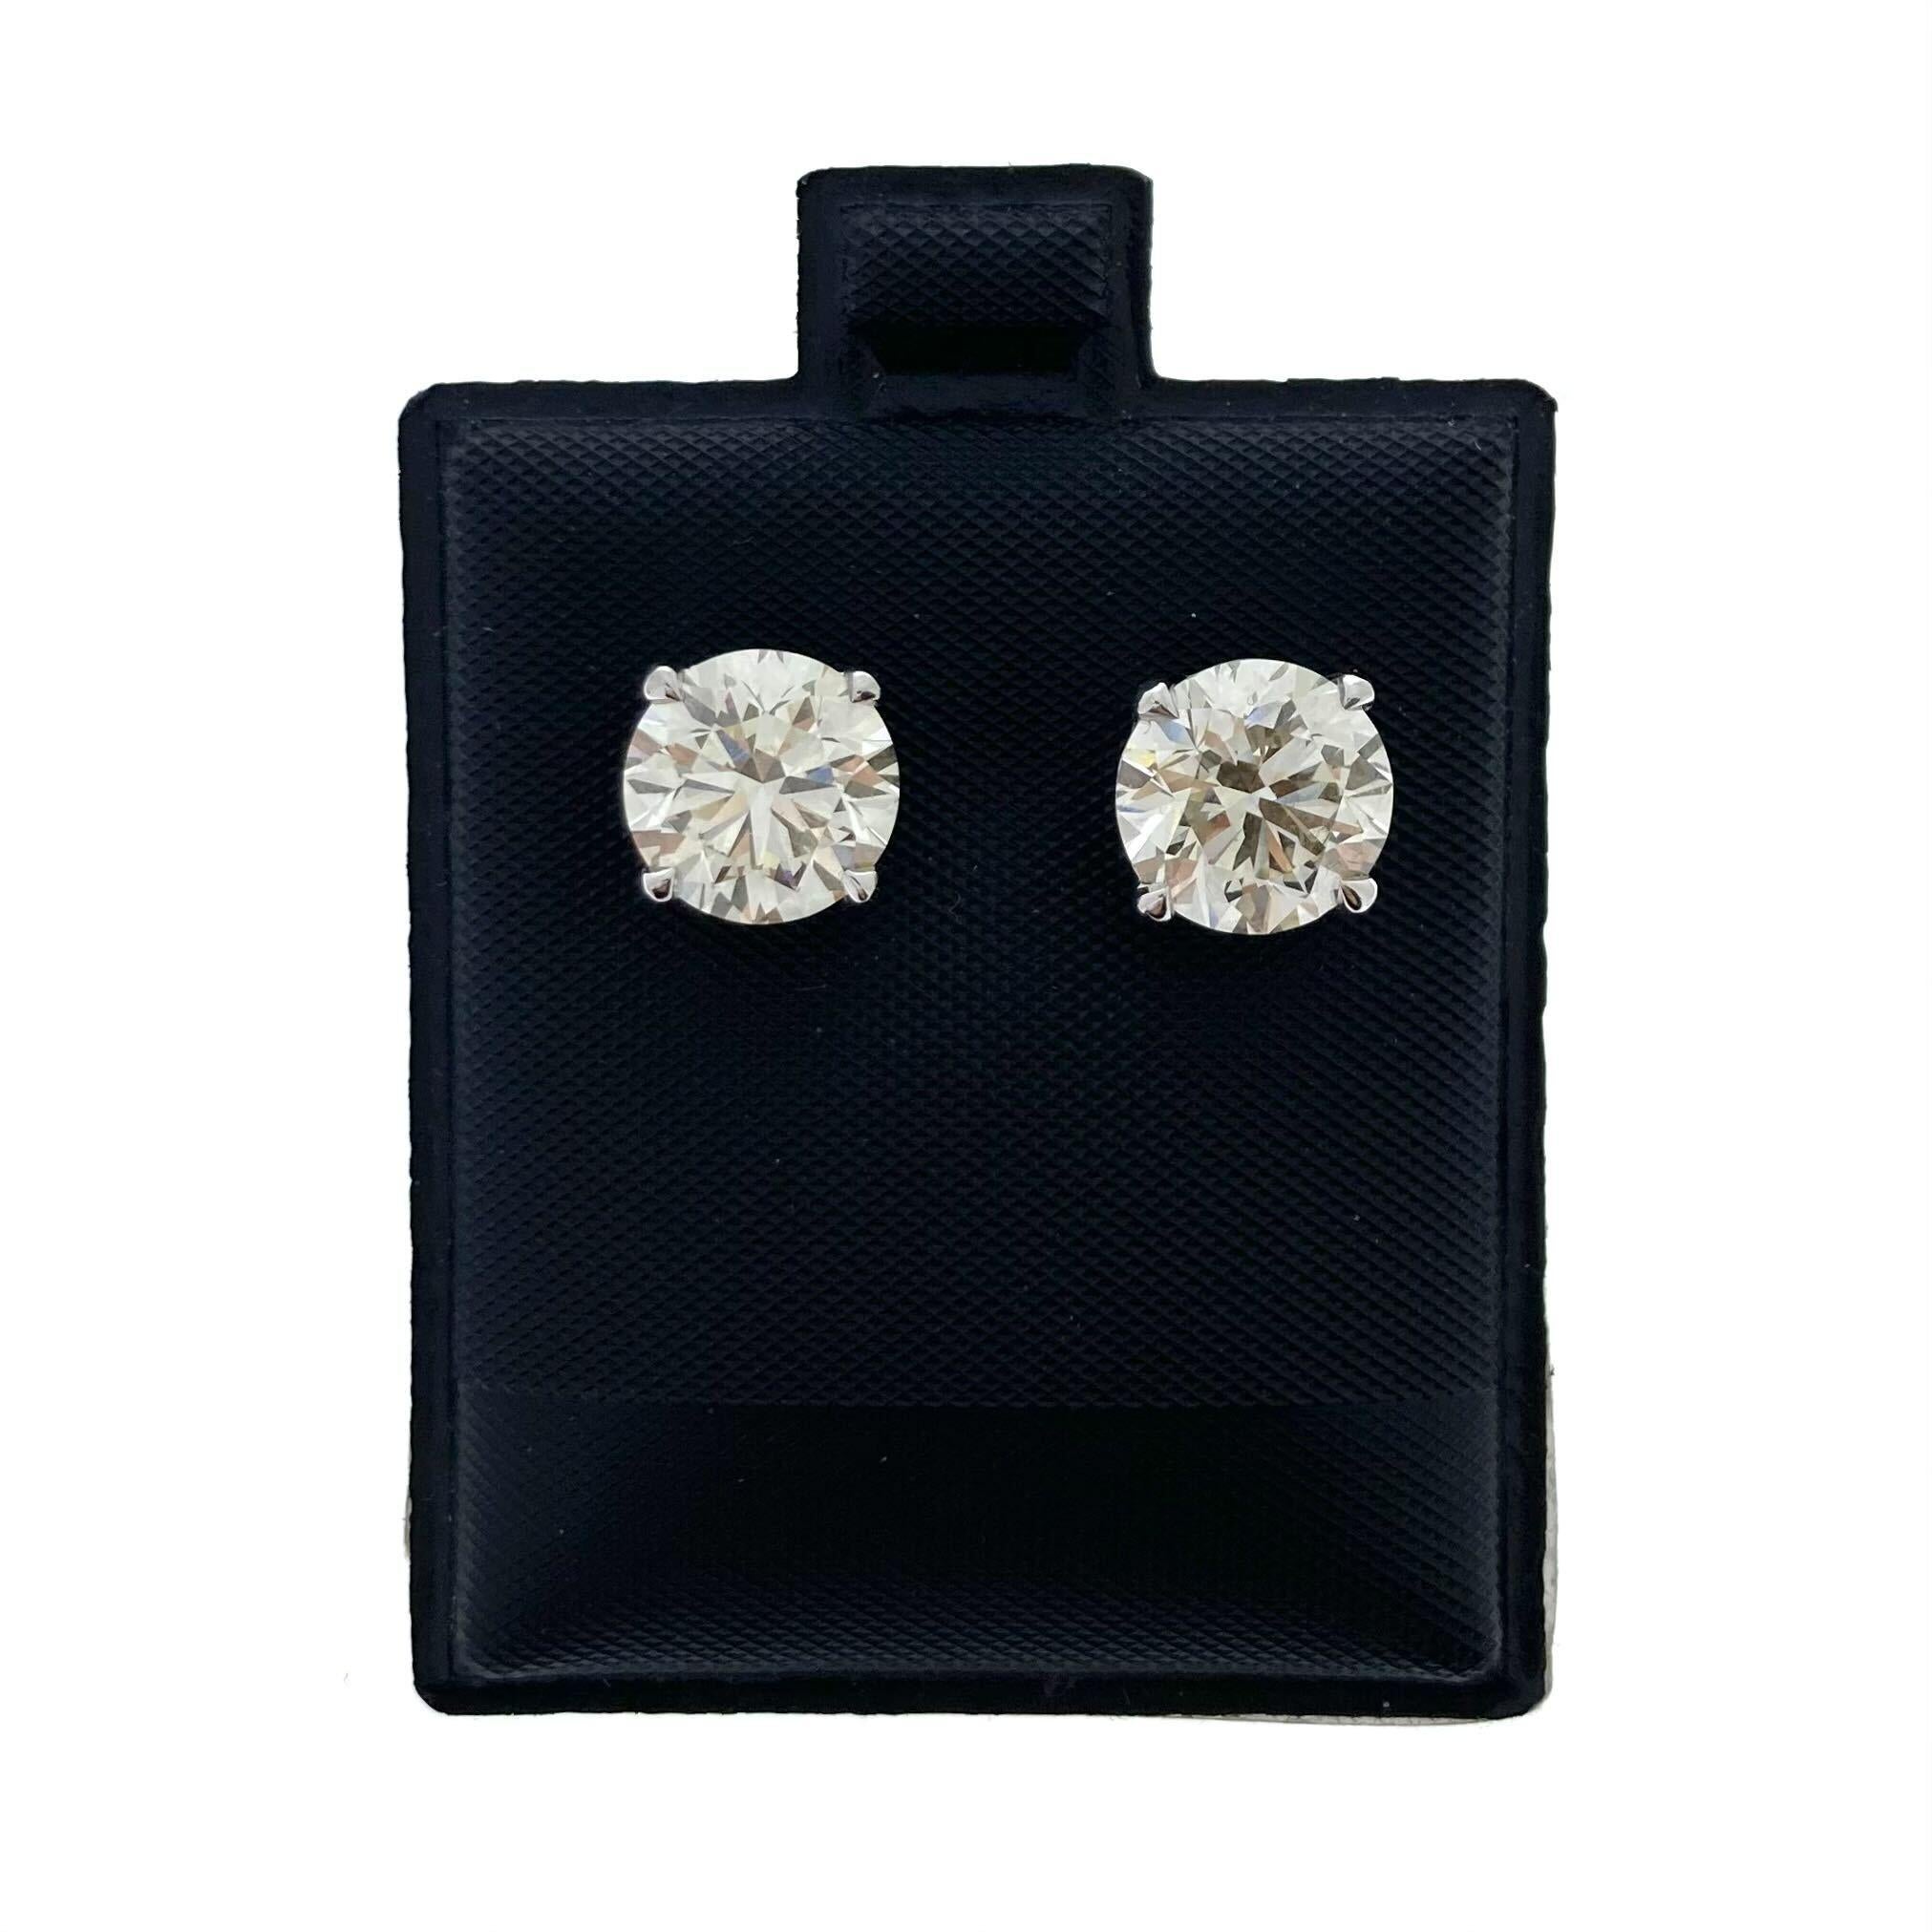 Embrace the epitome of luxury with these breathtaking 5.00 Total Carat Weight EGL Certified Round Diamond Studs in 14k White Gold. Each stud showcases a magnificent round diamond with a captivating J color grade, radiating warmth and sophistication.